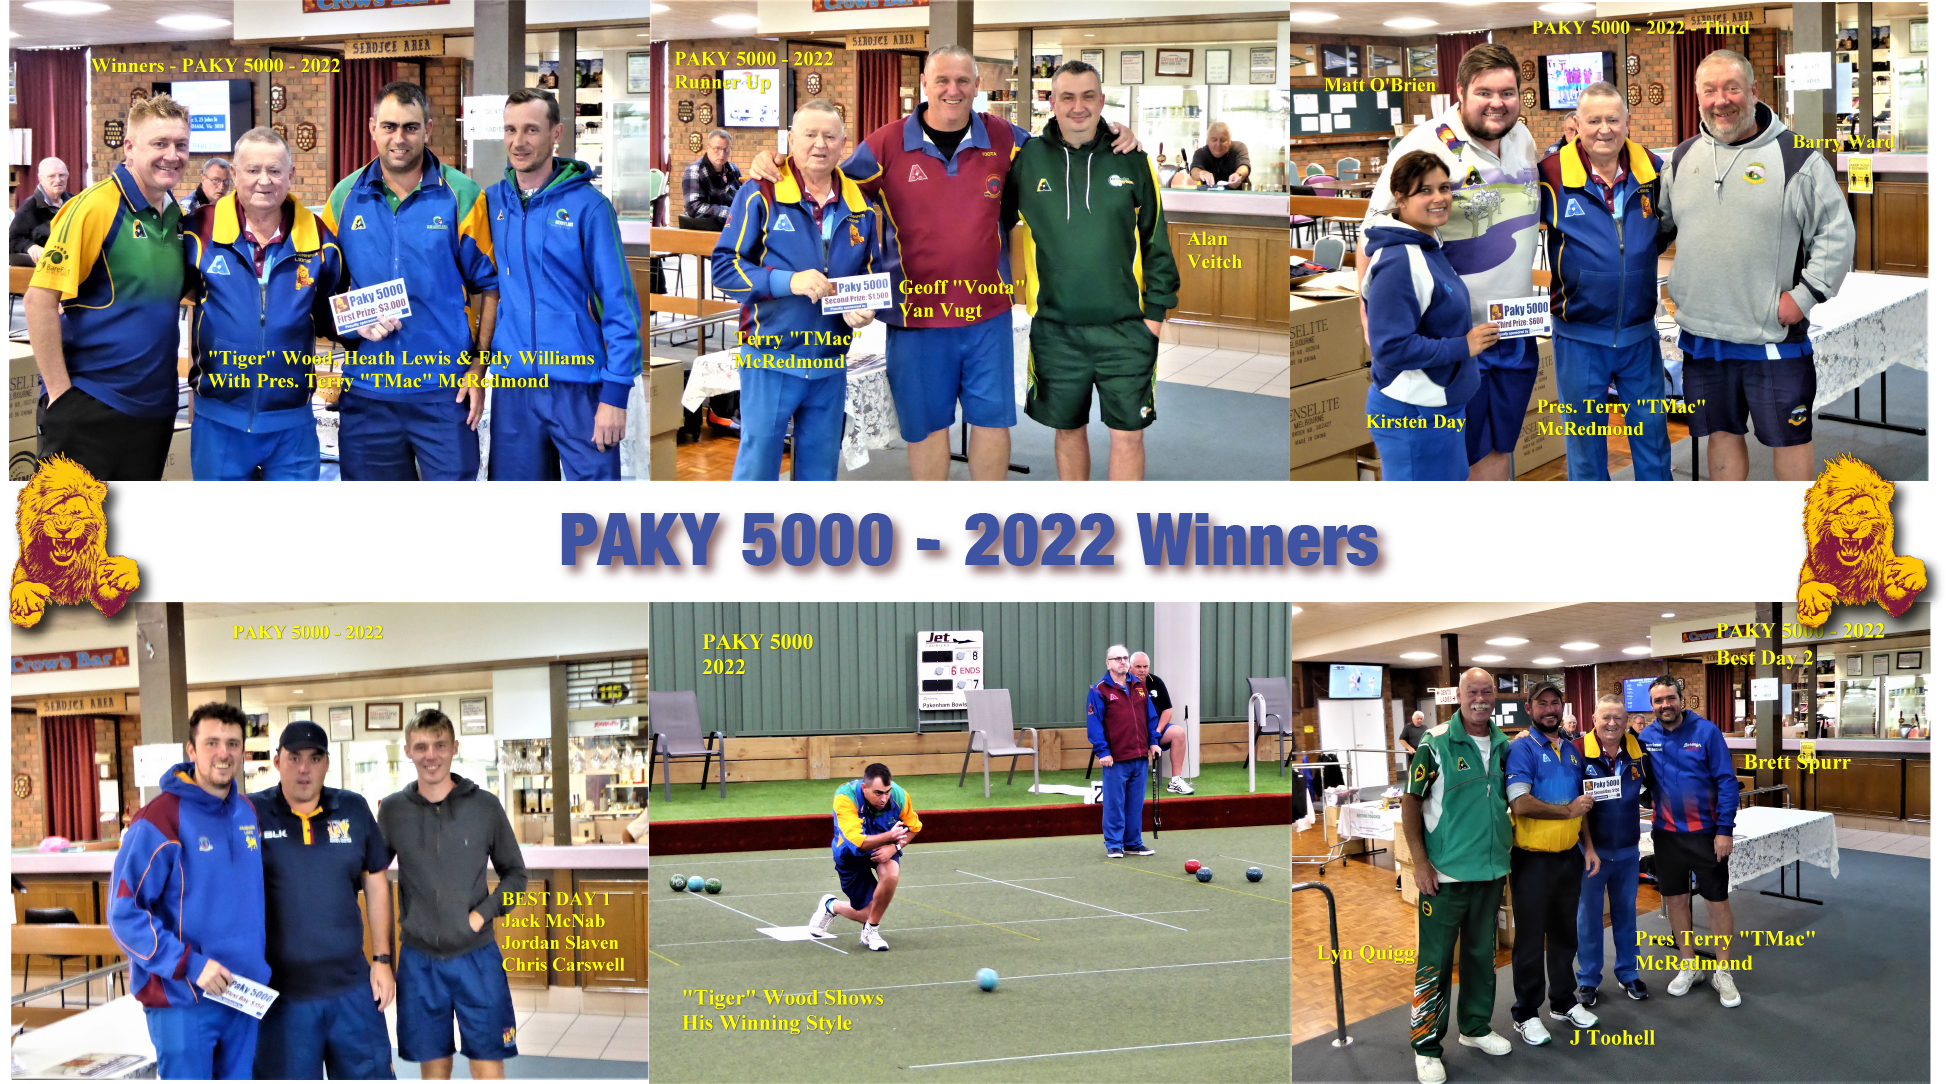 Contains the winning photos of the bowlers from the Paky 5000